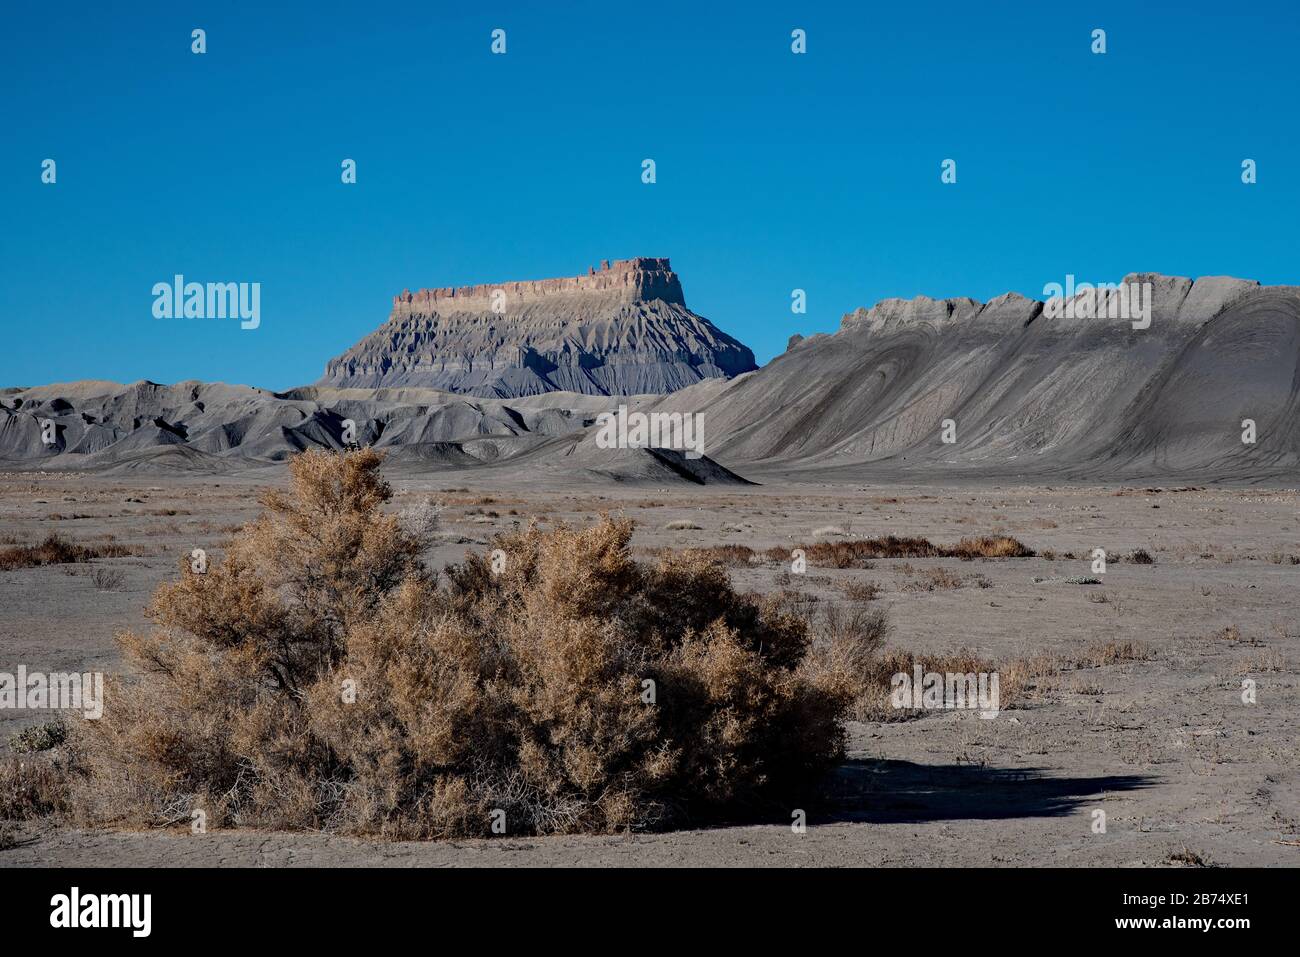 Factory Butte near Cainesville, Utah, USA.  This rugged badland area is often described as a 'moonscape.' Factory Butte is a prominent feature. Stock Photo